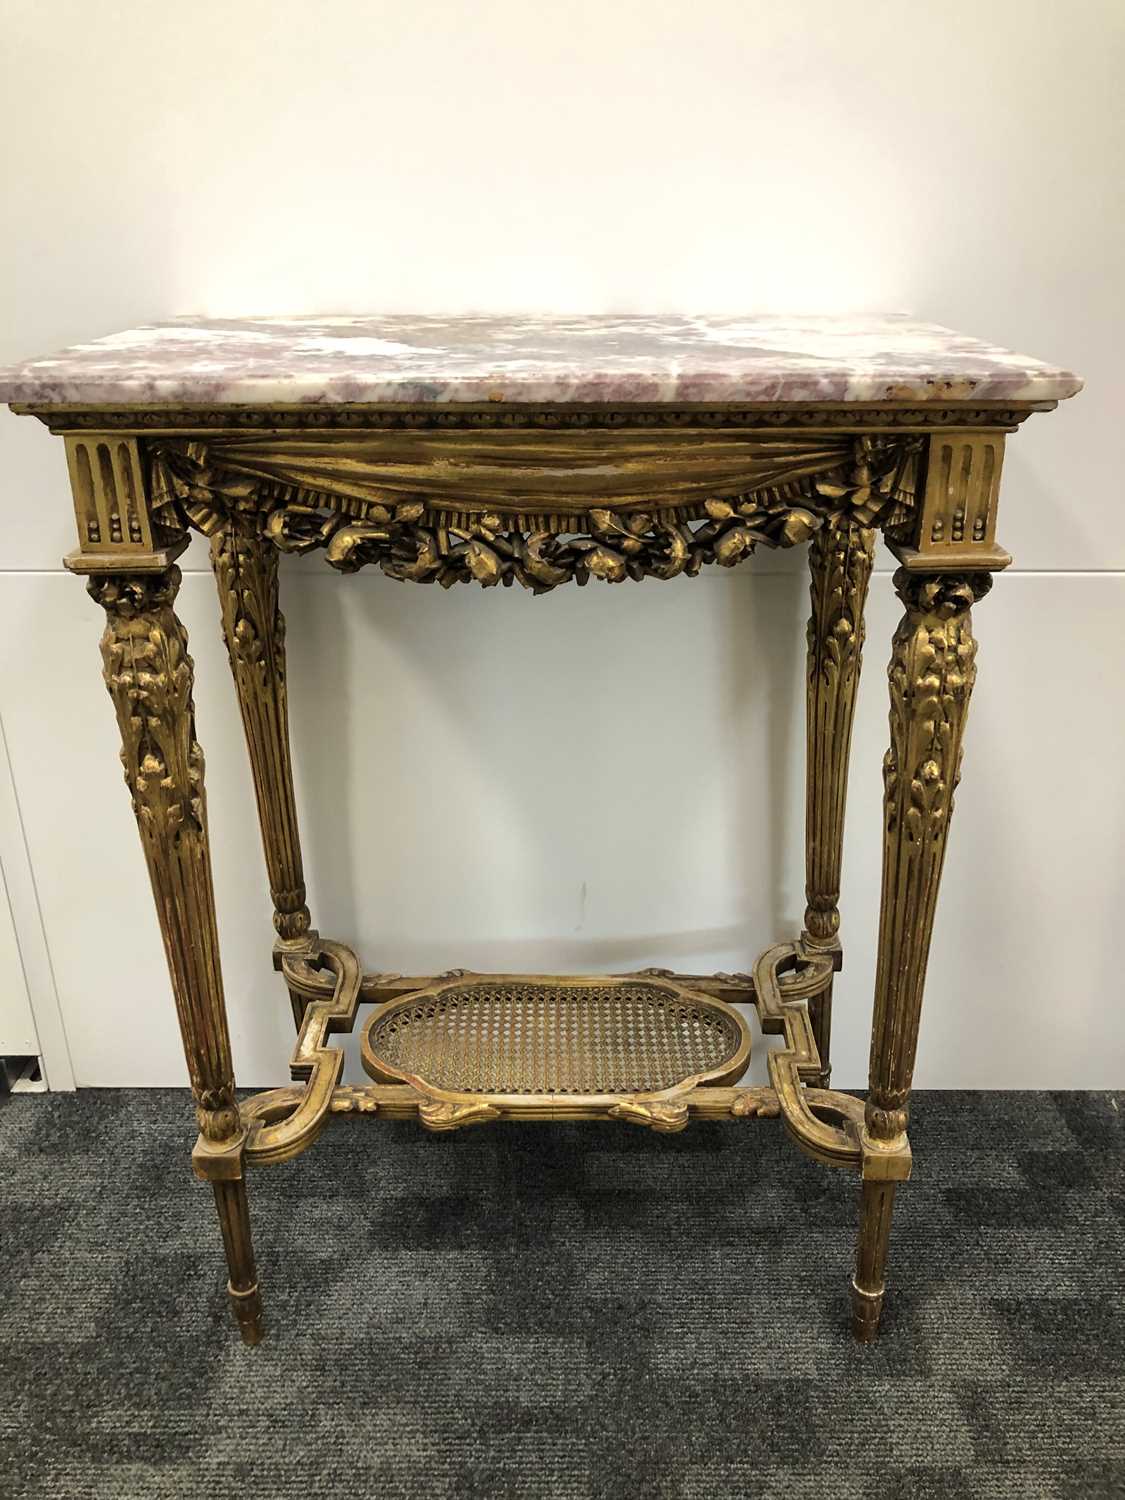 Lot 54 - An early 20th century continental gilt wood and marble topped occasional table